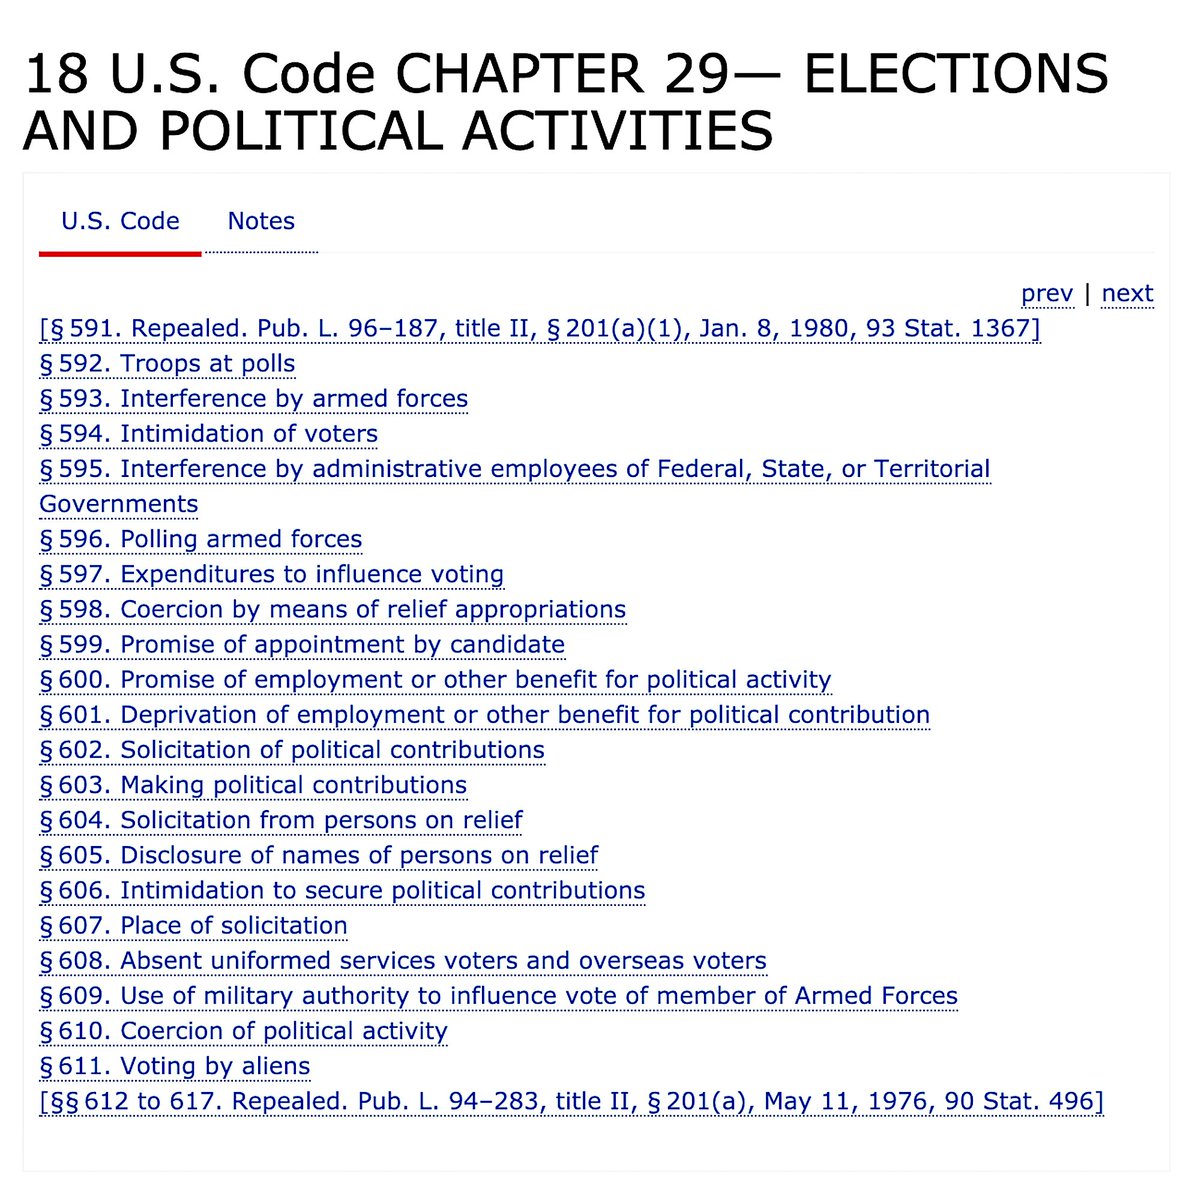 18 U.S. Code Chapter 29 - Elections And Political Activities https://www.law.cornell.edu/uscode/text/18/part-I/chapter-29